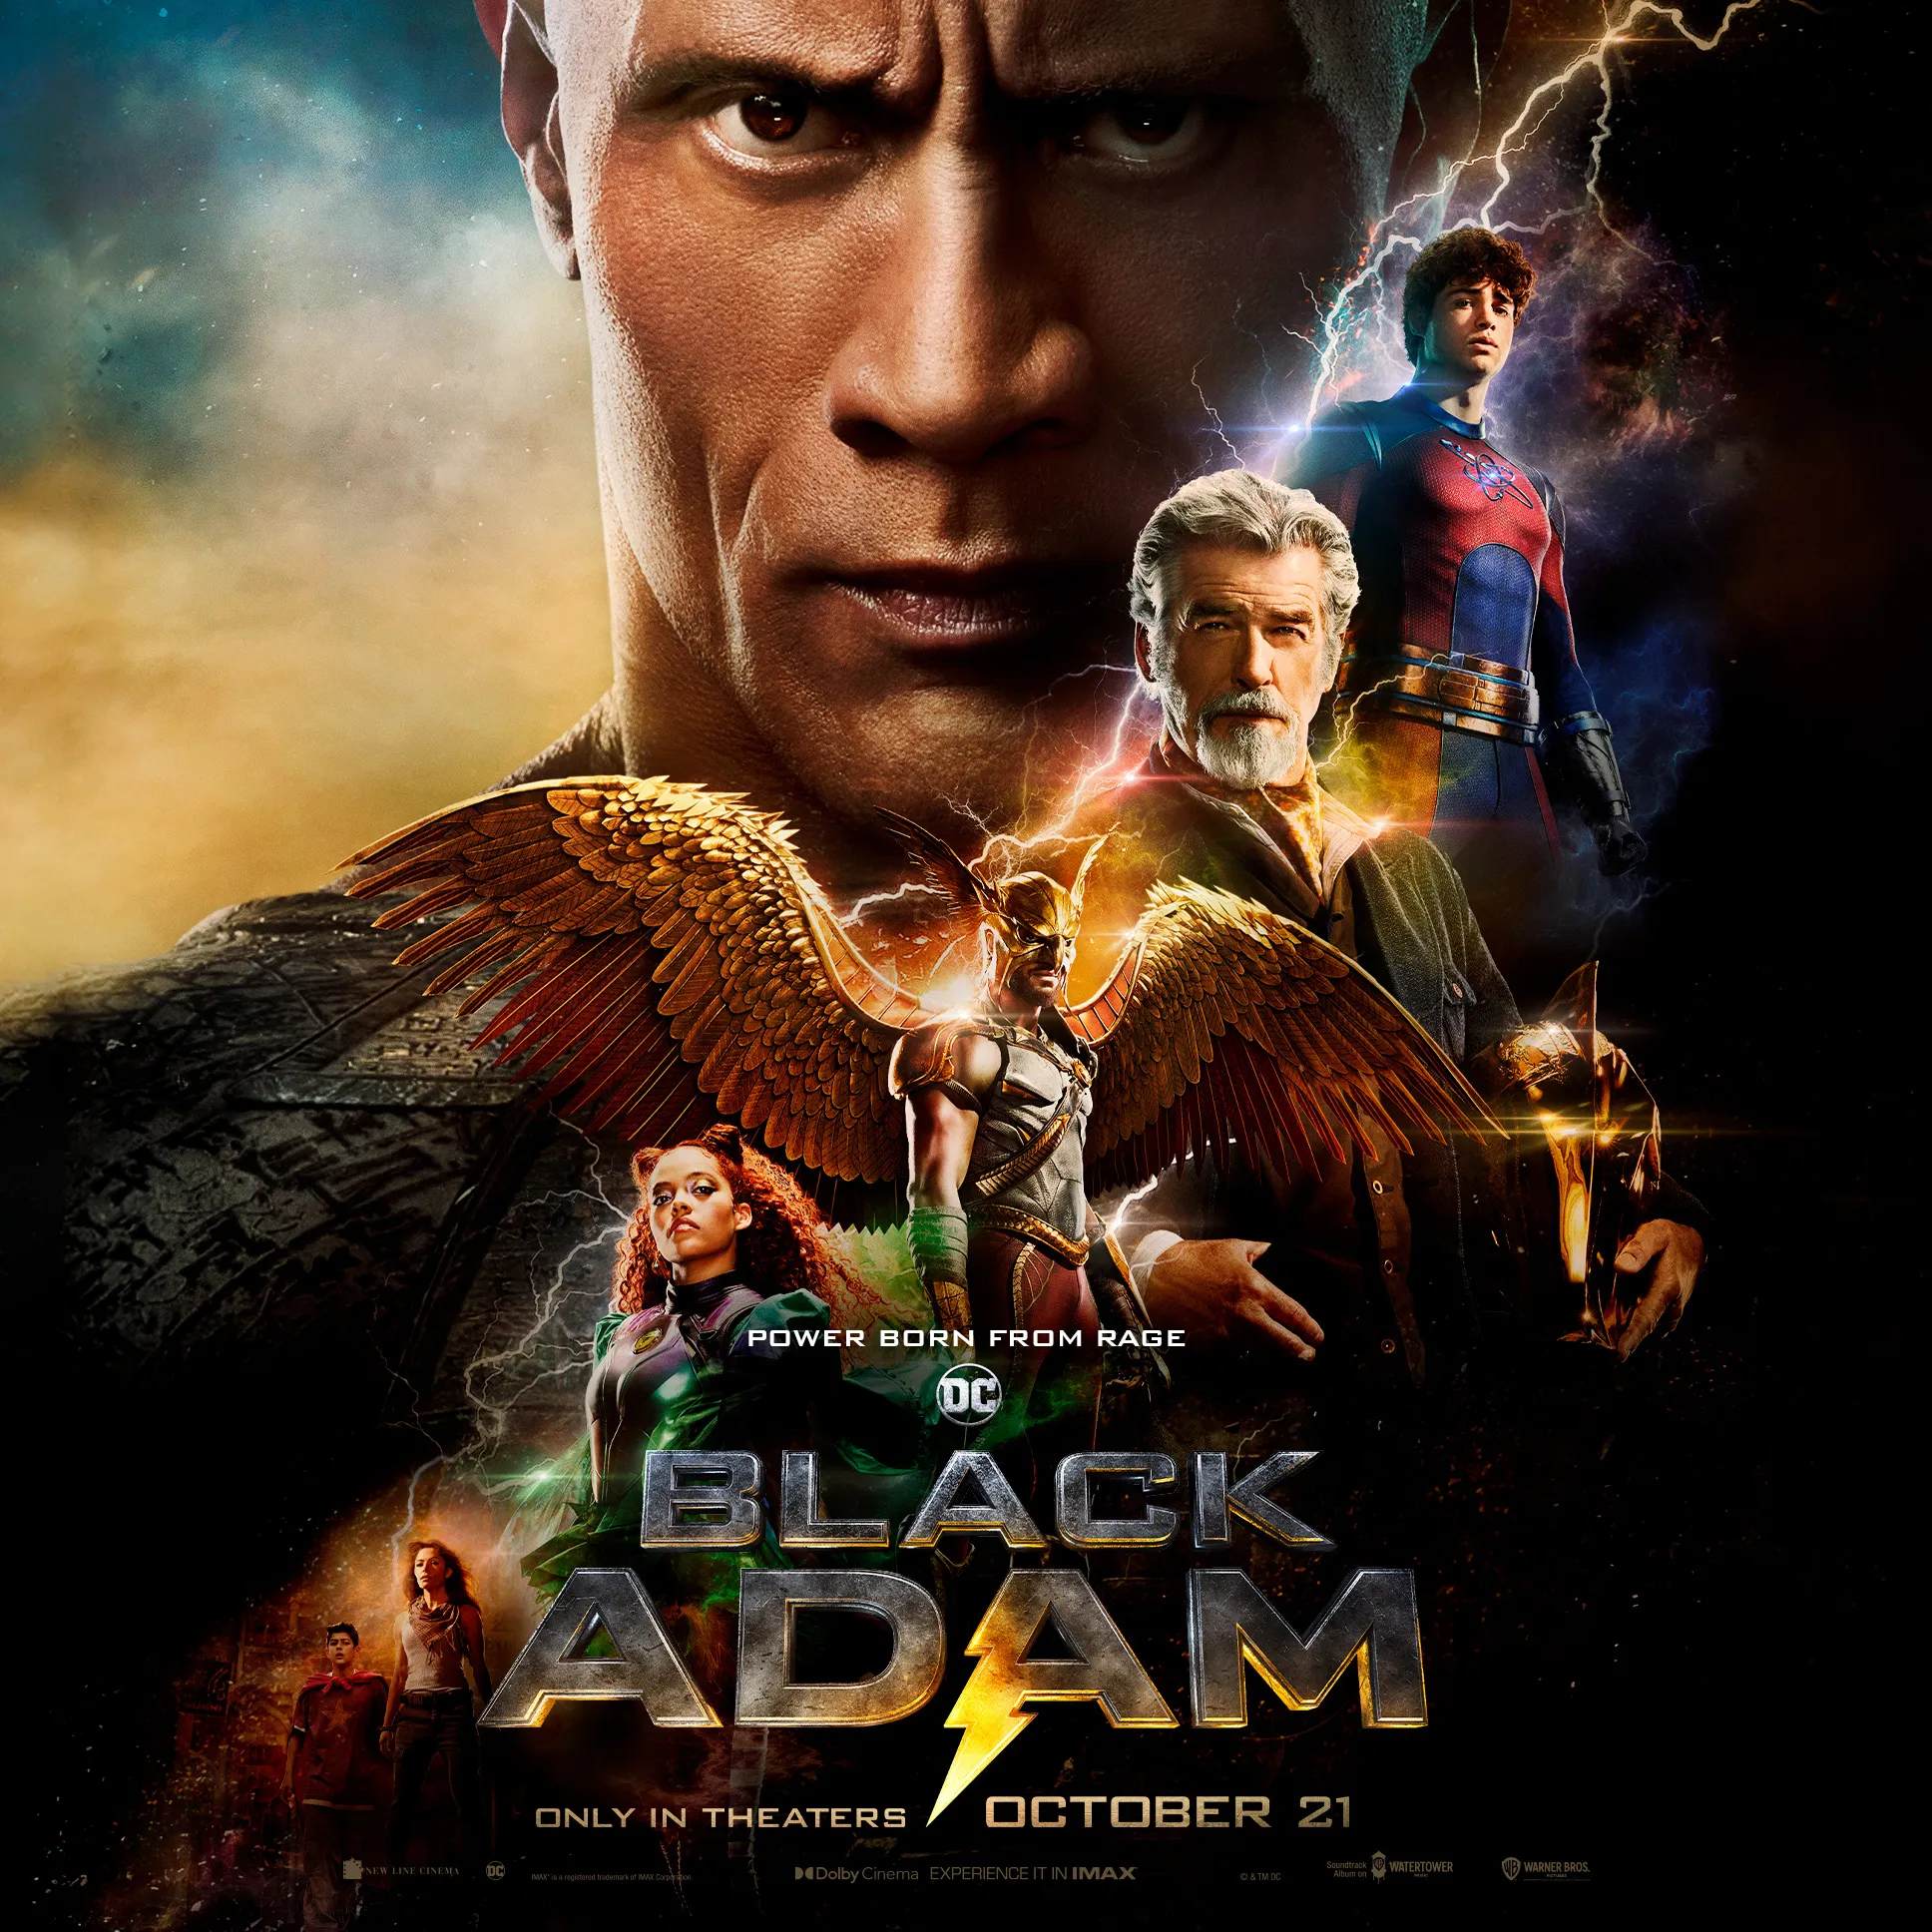 Superman and Batman appear in new trailer for 'Black Adam', the film has 124 minutes | FMV6